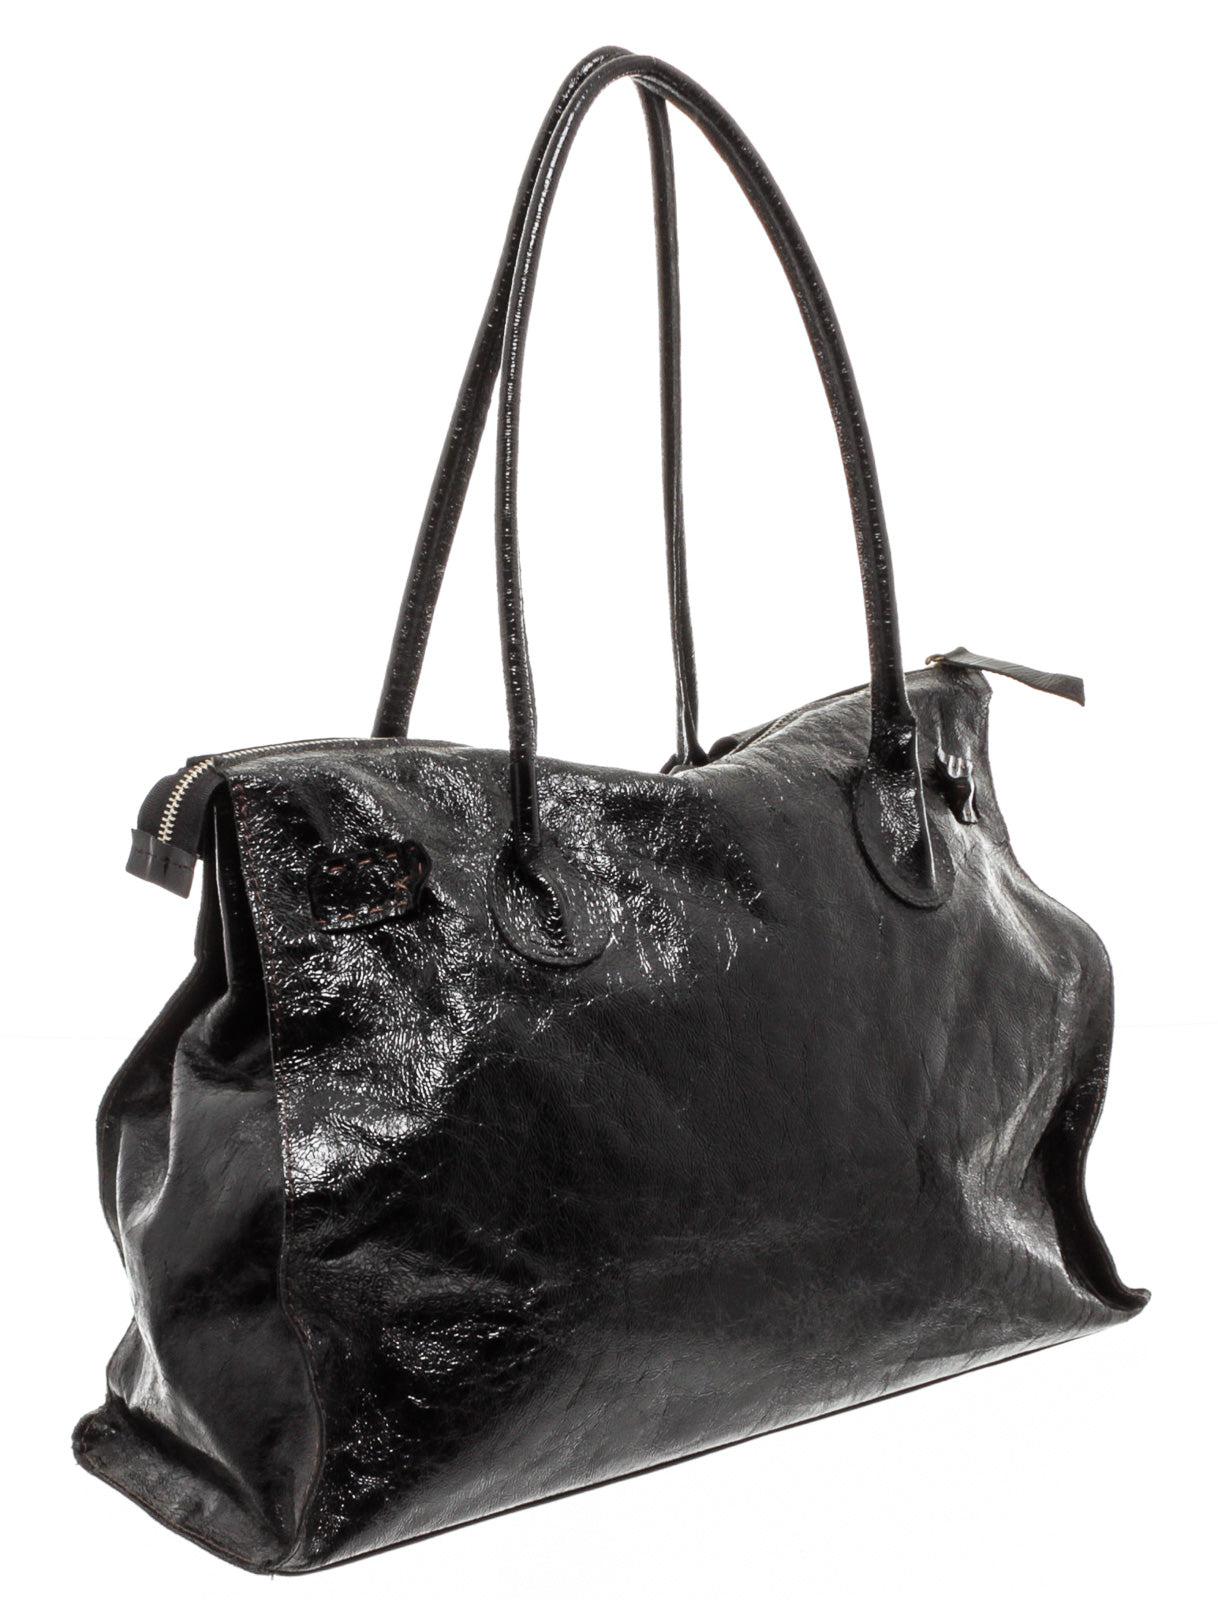 Carla Mancini black crinkle patent leather tote bag with black nylon lining, interior zip pocket, front exterior flap pocket, zip top closure.
15016MSC CON